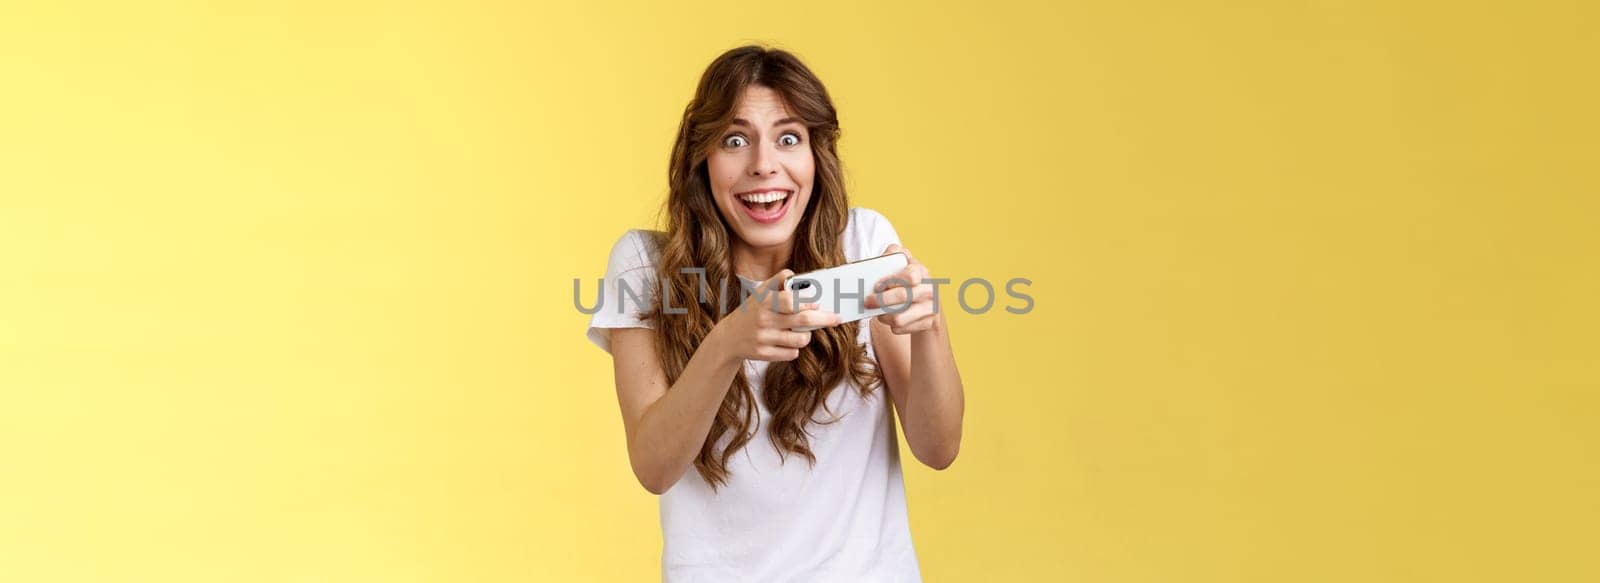 Happy enthusiastic excited cute playful girl winning awesome smartphone game thrilled playing stare camera surprised triumphing smiling happily hold mobile phone horizontal yellow background.